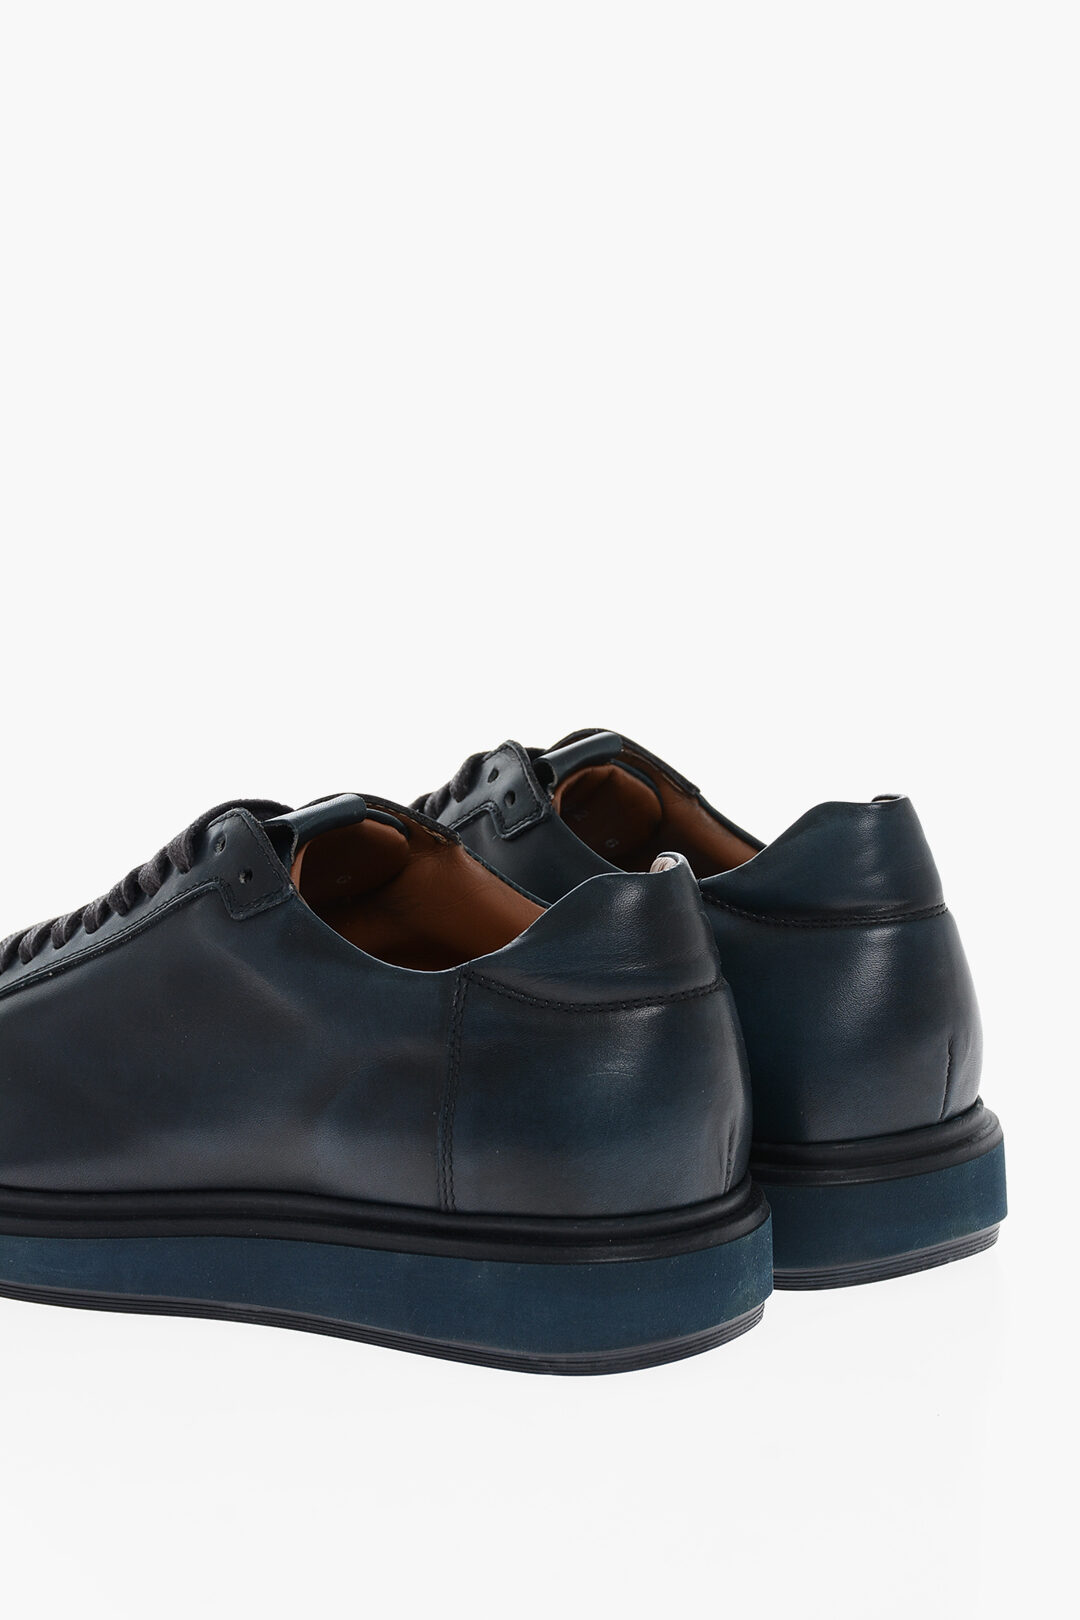 Corneliani Lace-up Low-top Sneakers with Ton sur Ton Sole men - Glamood ...